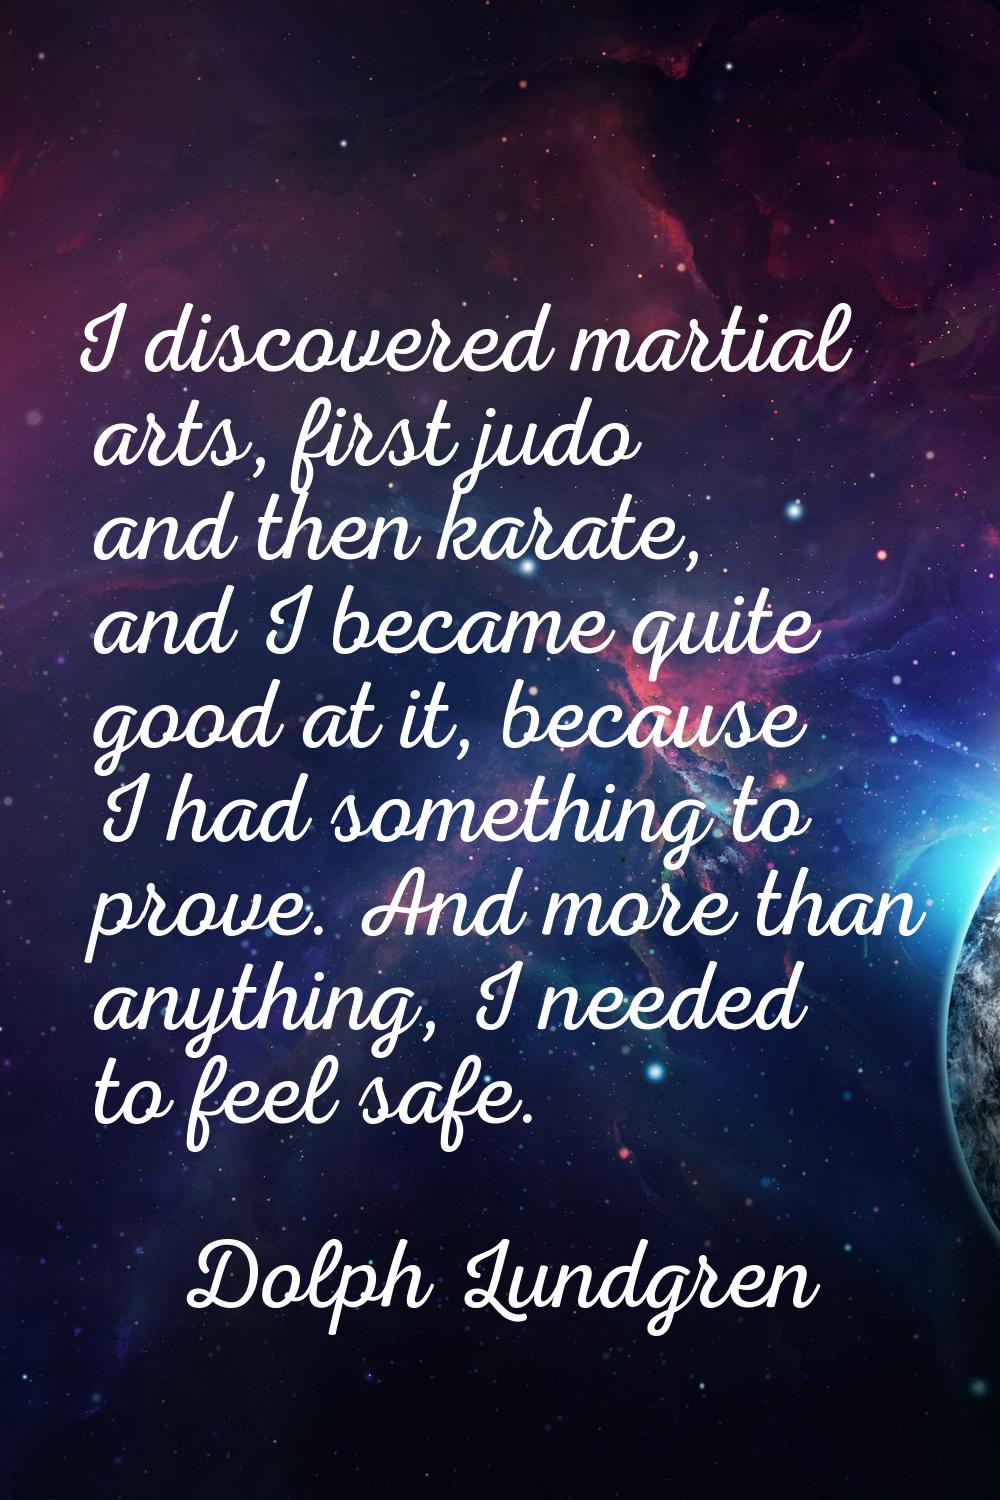 I discovered martial arts, first judo and then karate, and I became quite good at it, because I had